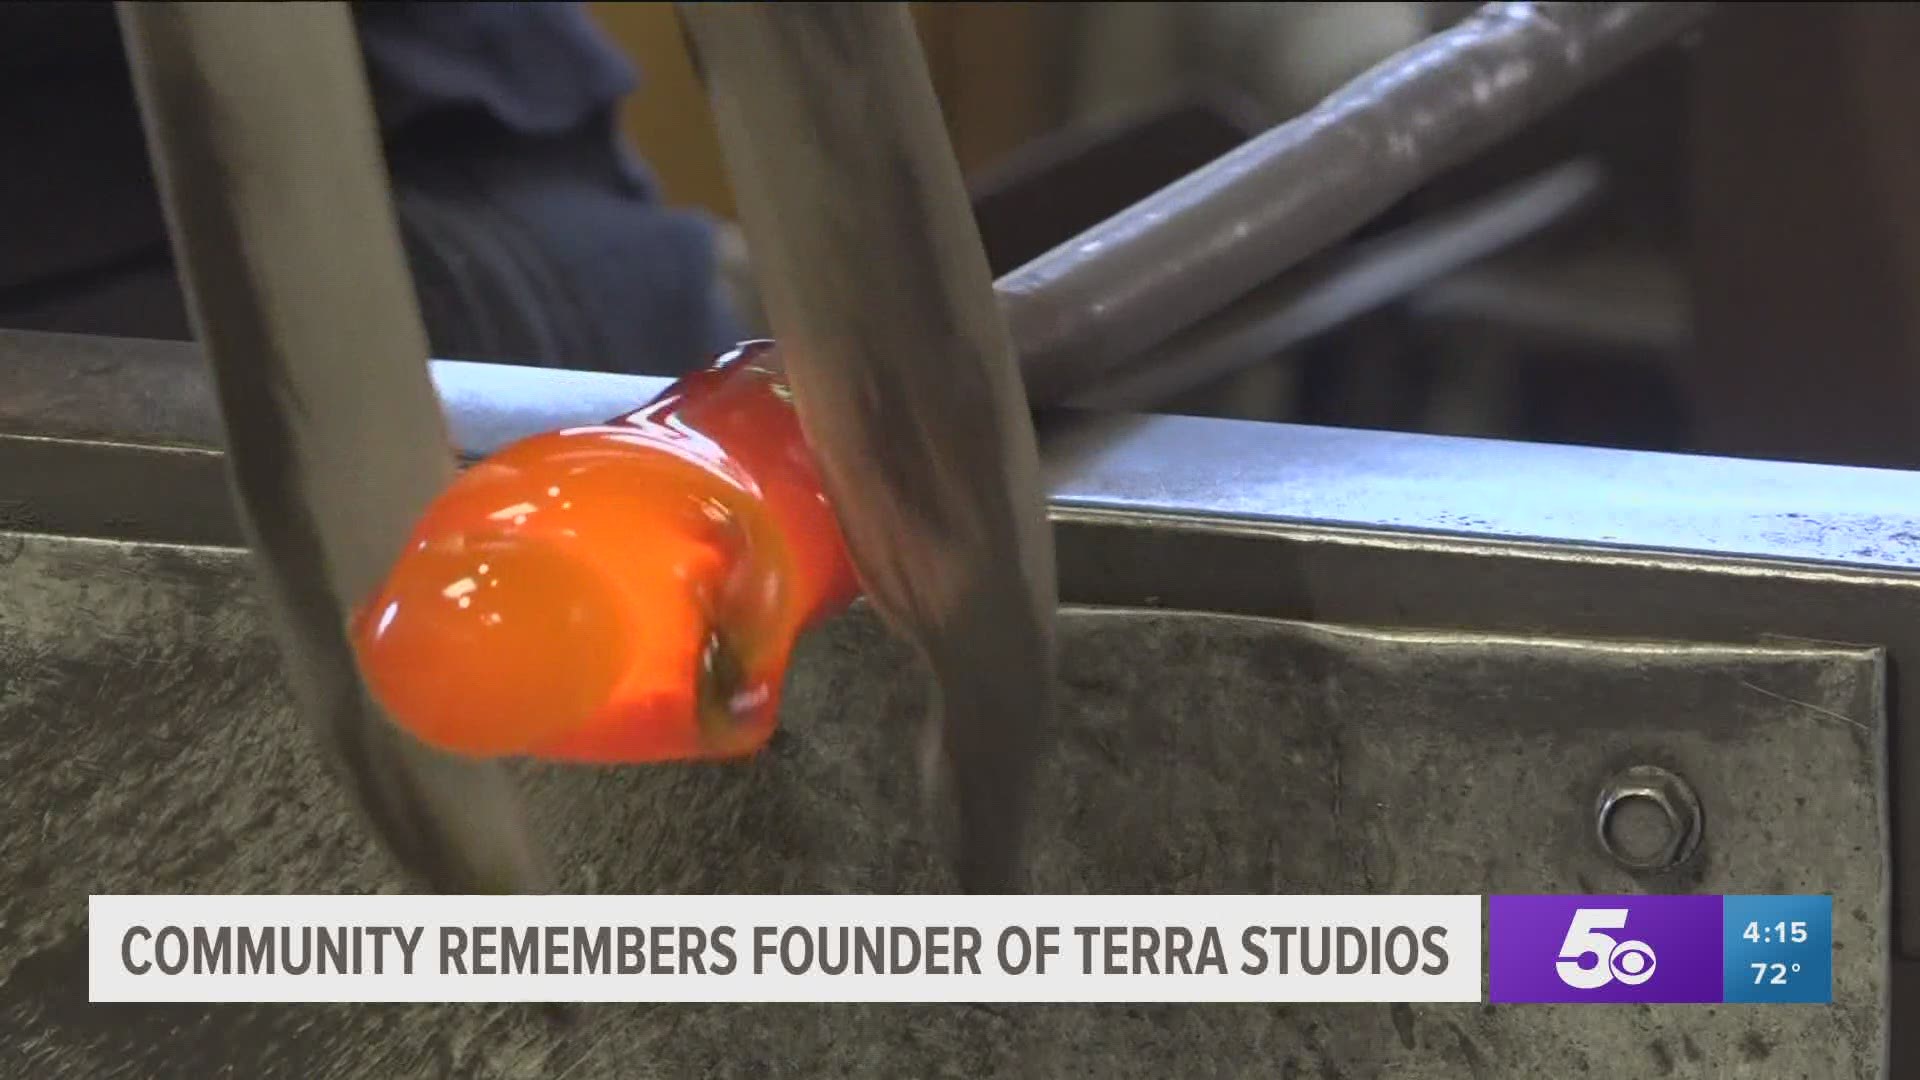 Terra Studios founder died on Mother's day